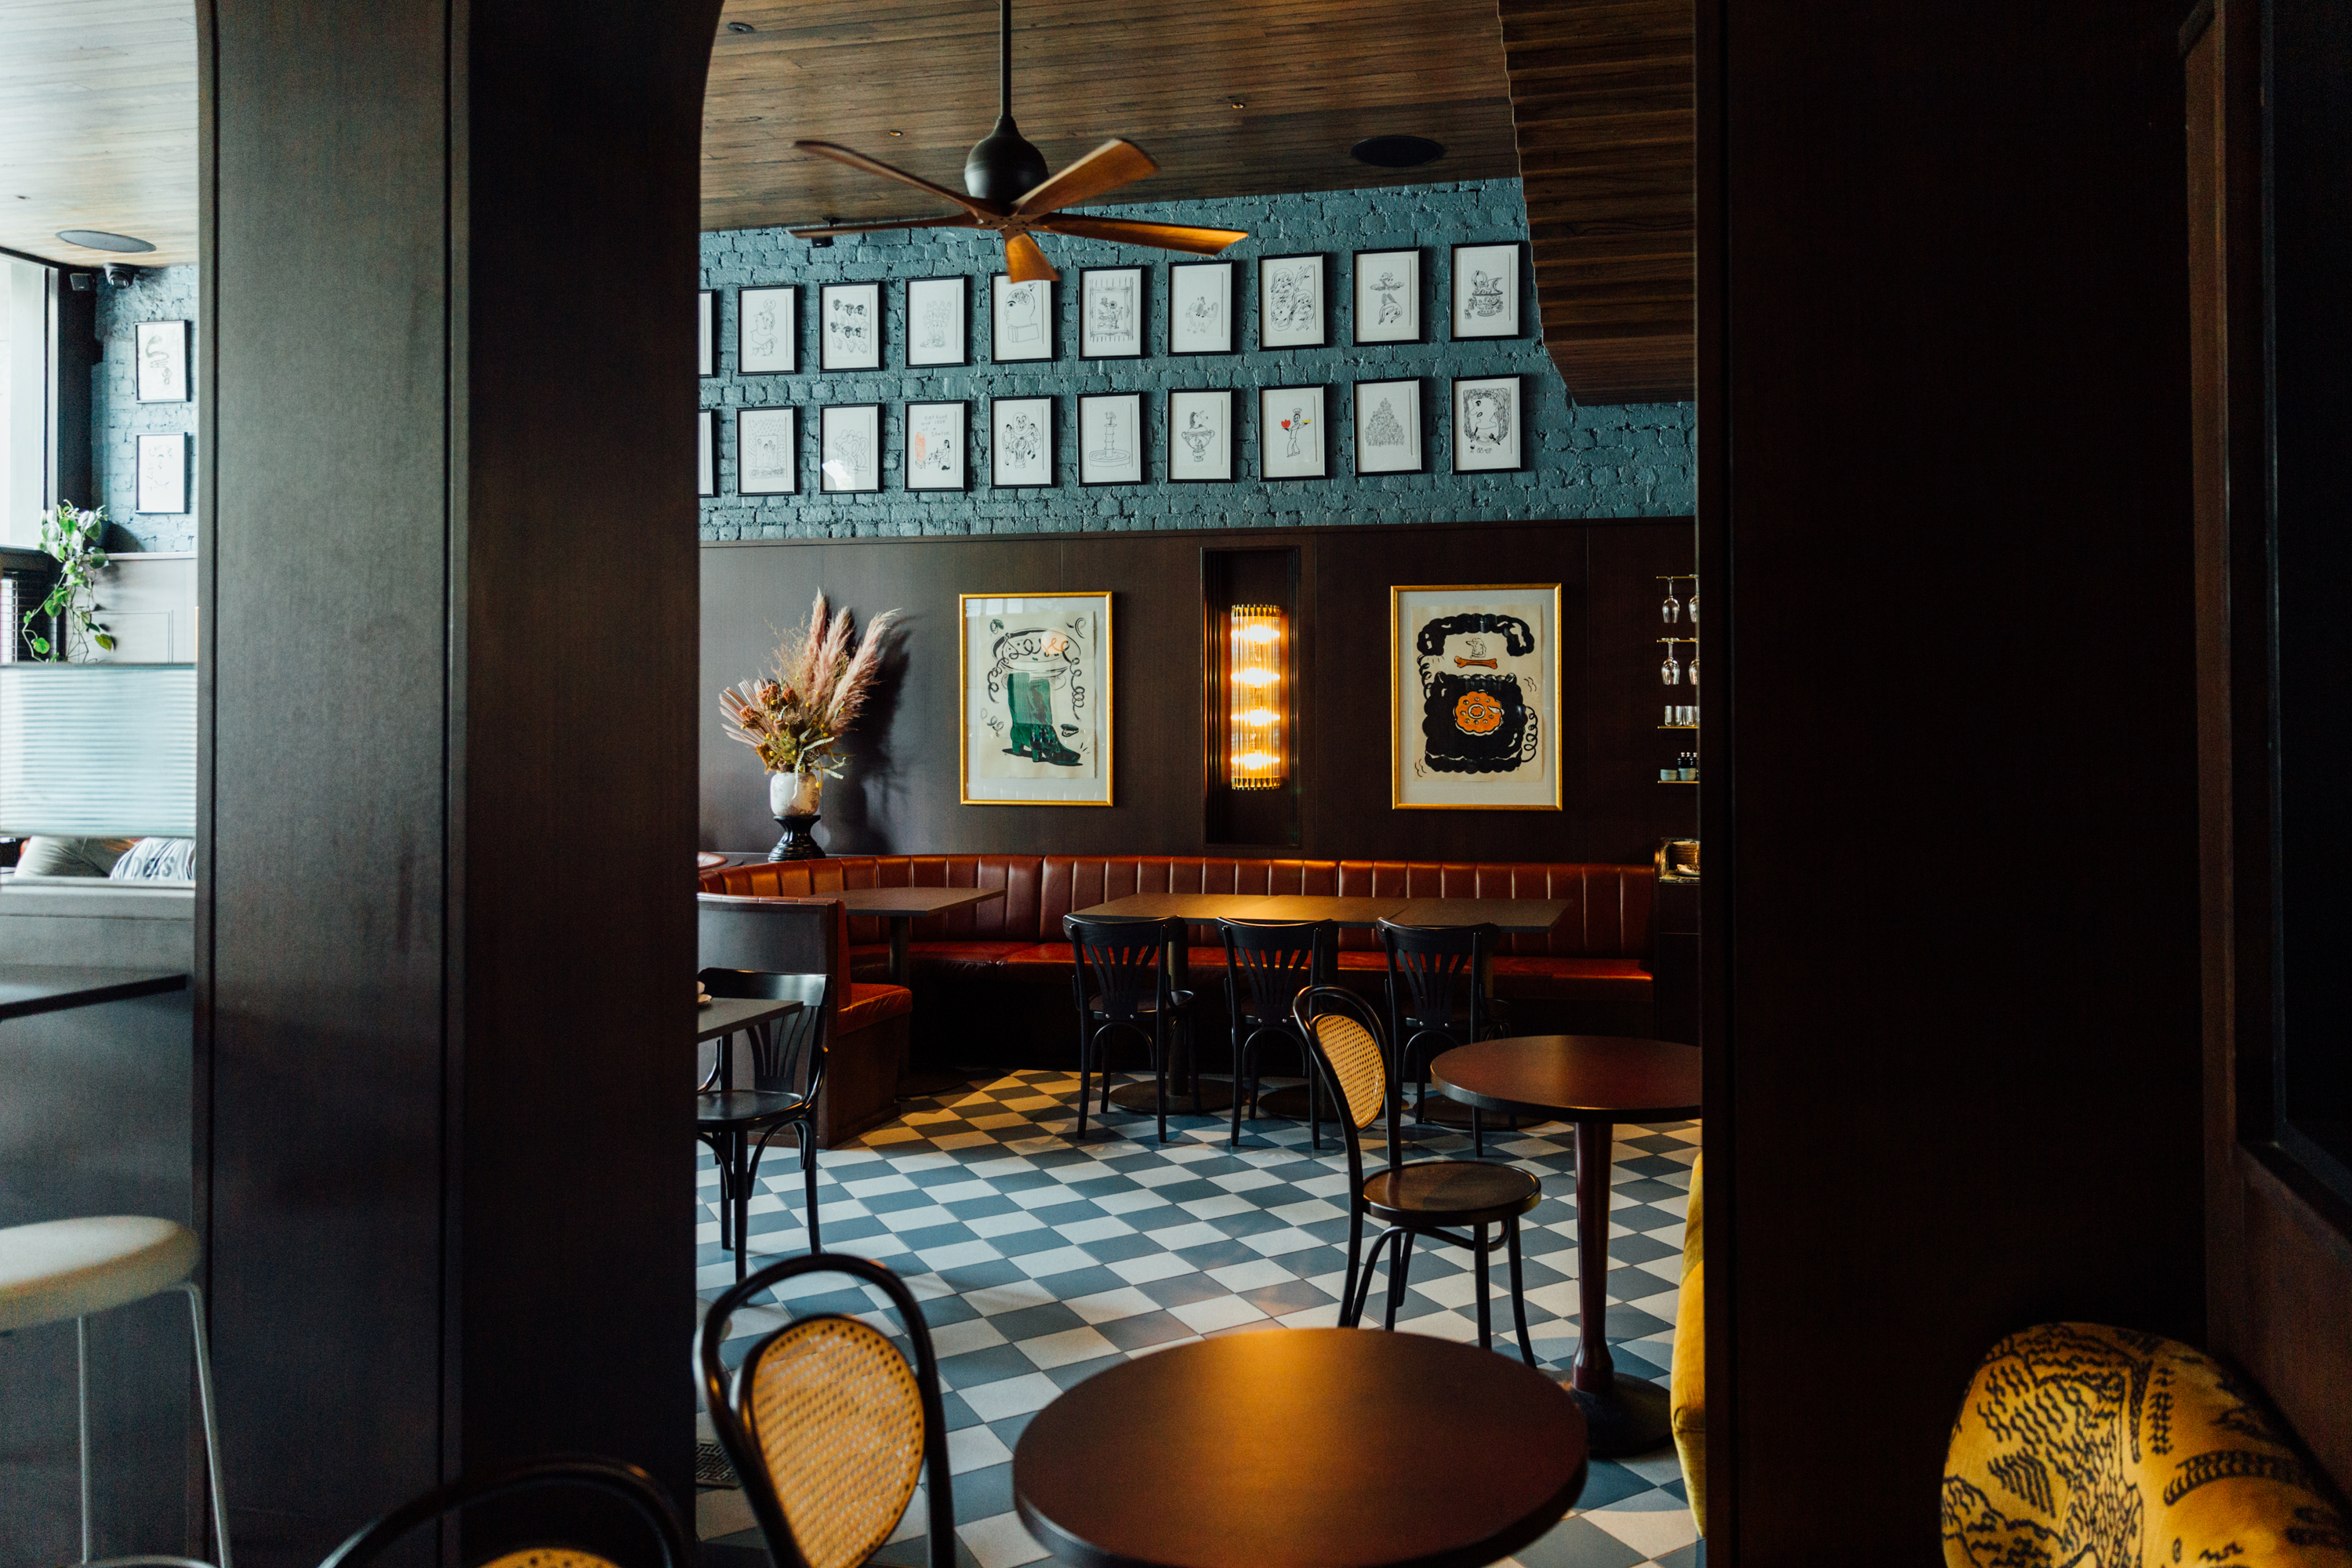 The interior of Poodle bar. Colorful tiles line the floor.